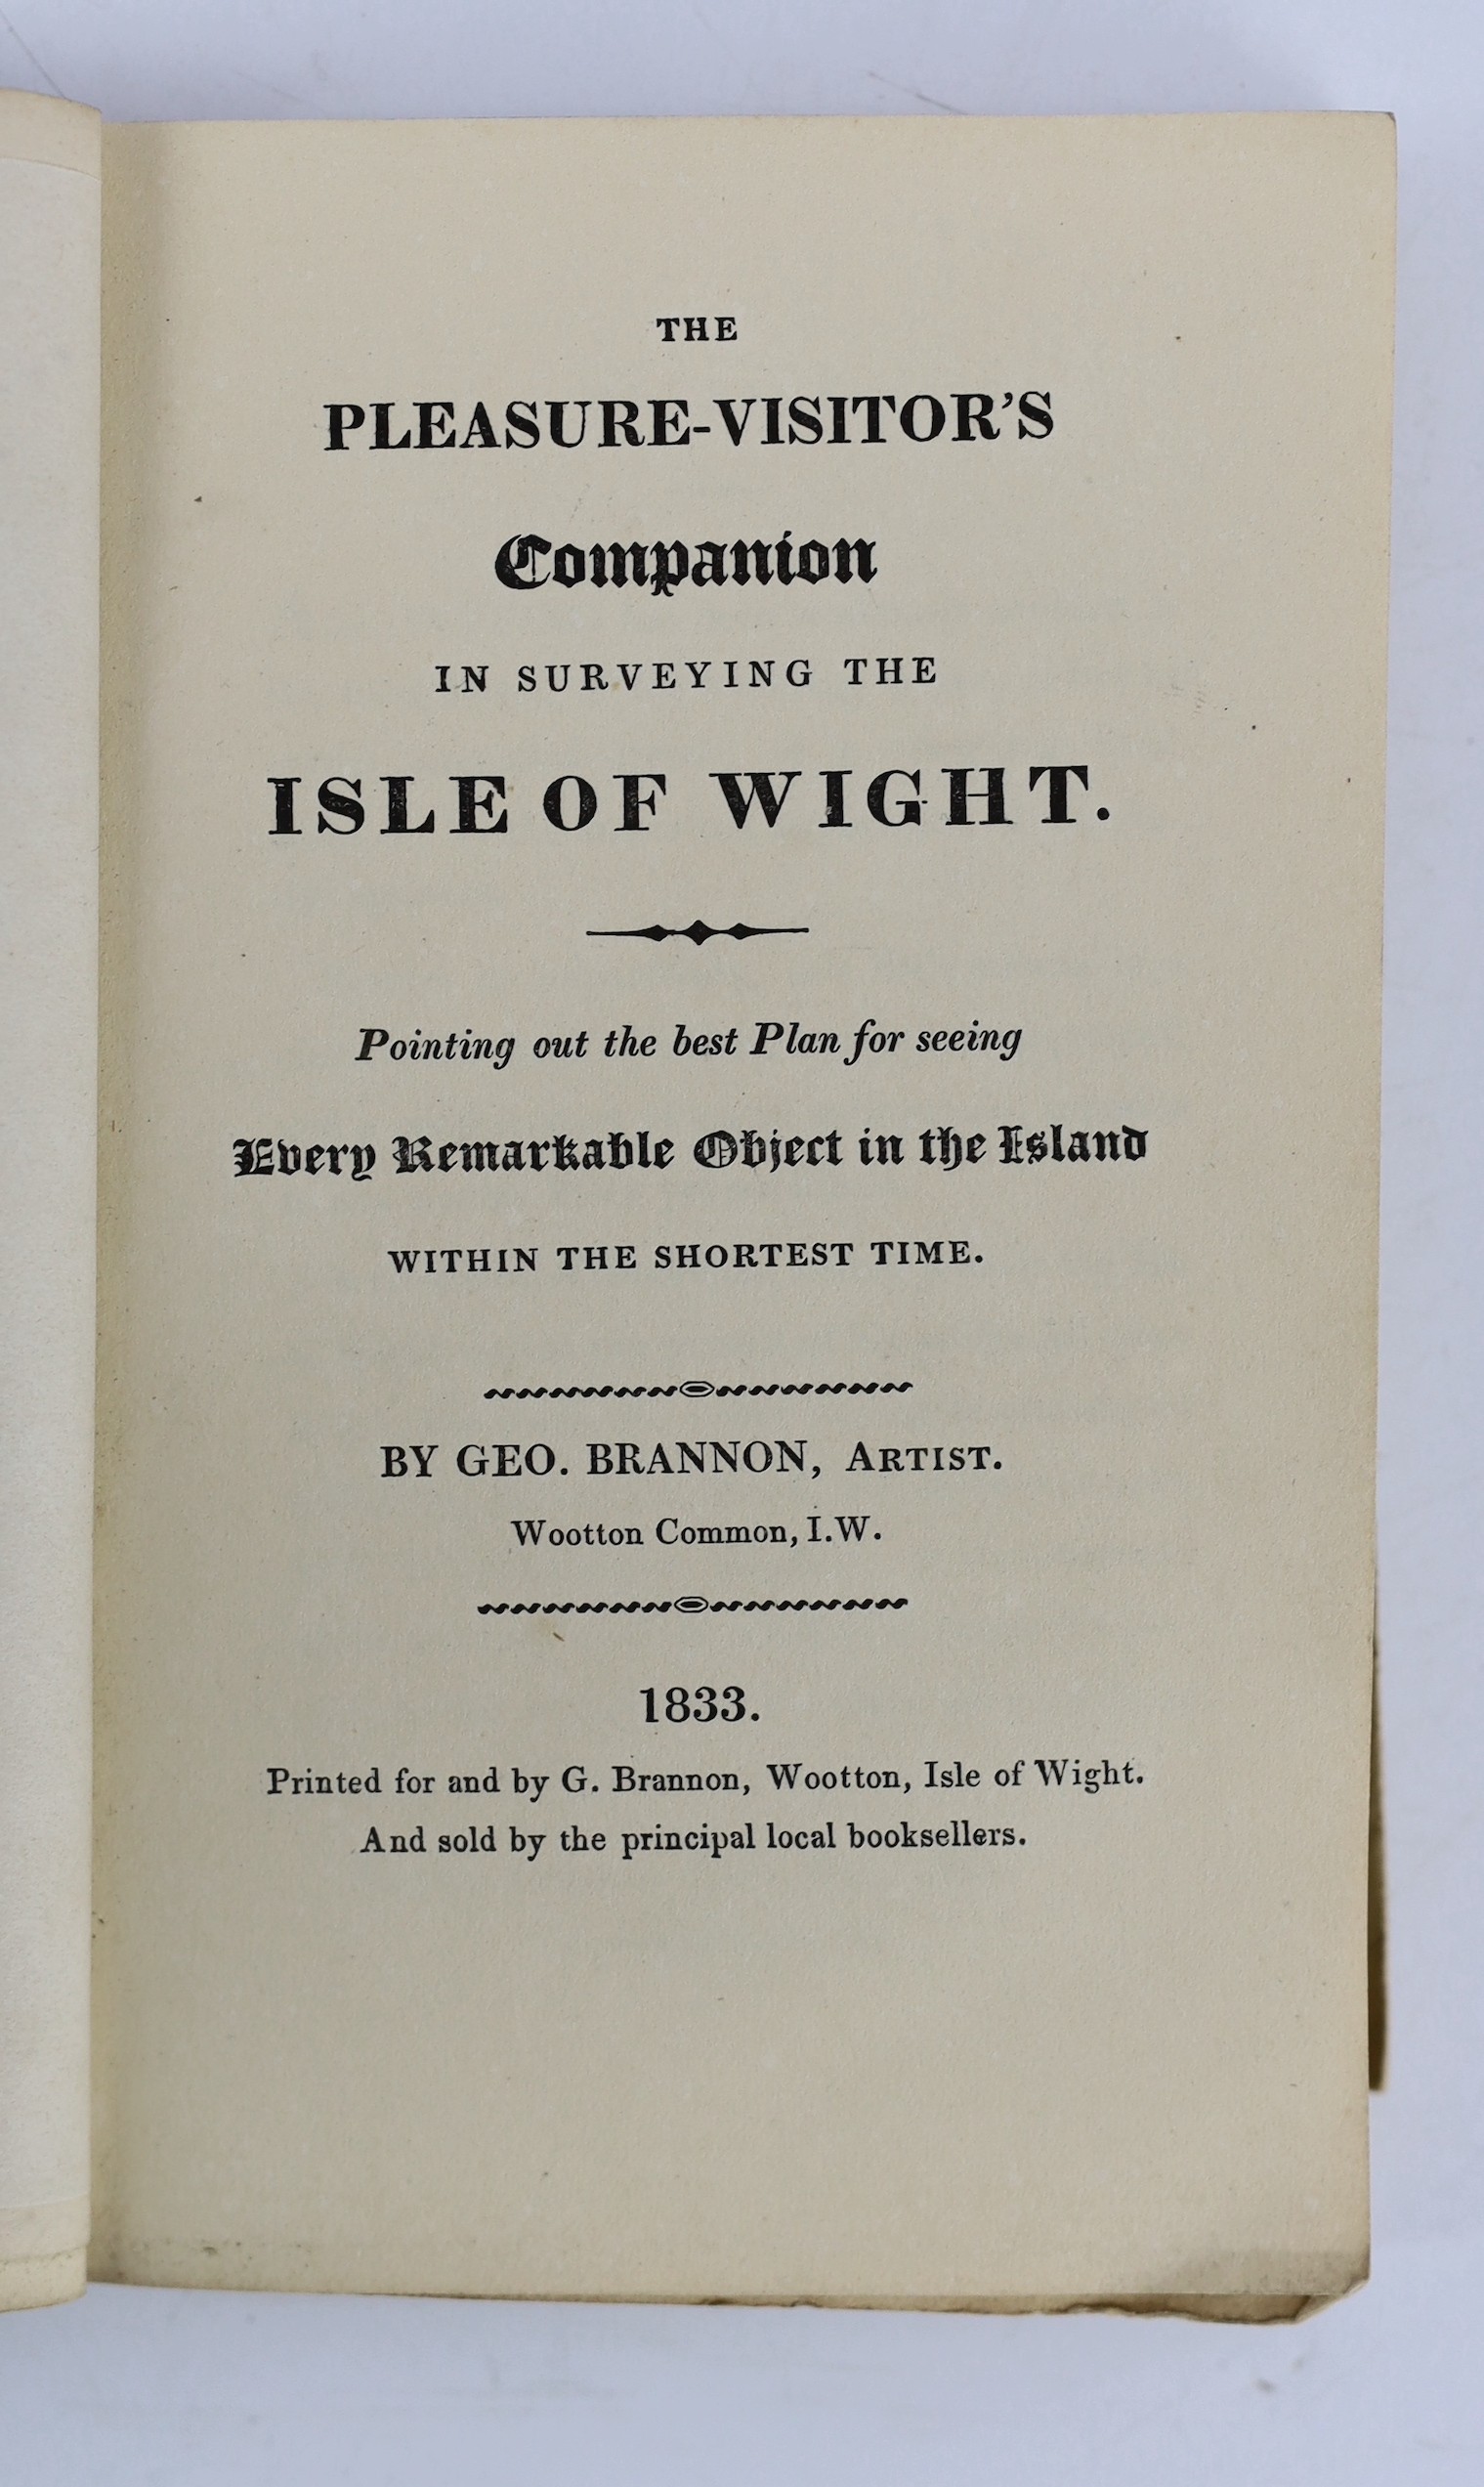 ISLE OF WIGHT: Brannon George - The Pleasure - Visitor's Companion in Surveying the Isle of Wight. Pointing out the best plan for seeing every remarkable object ... within the shortest time.